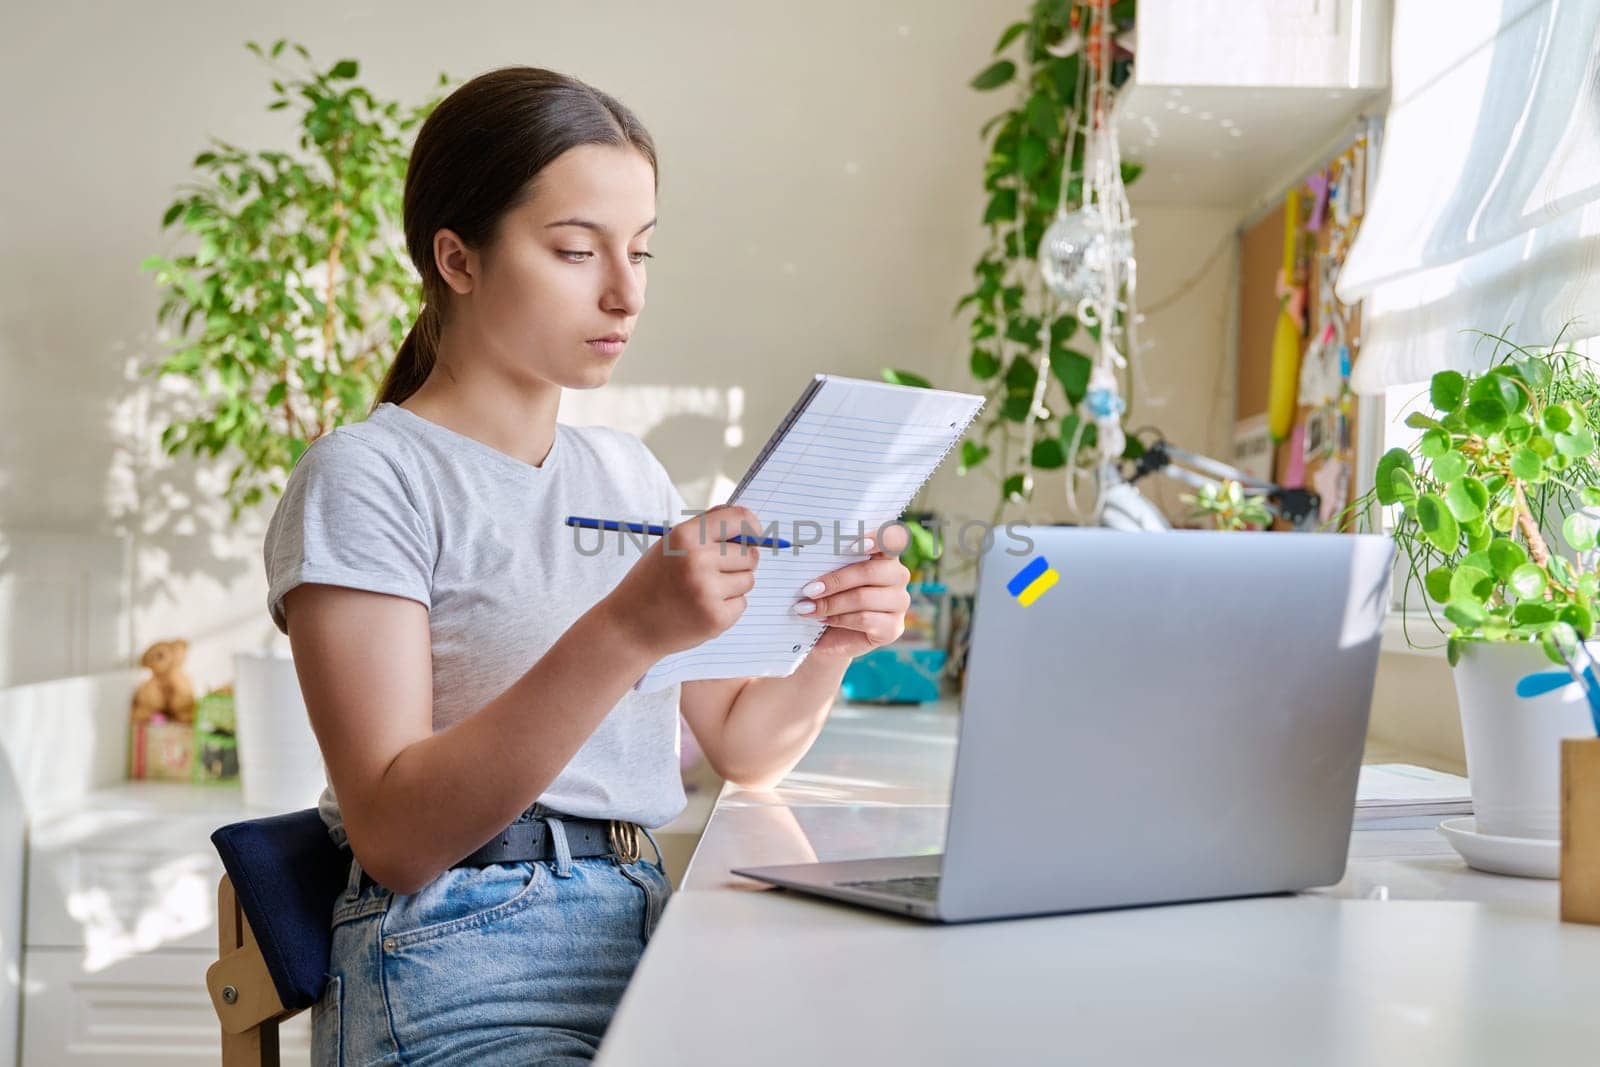 Teenage girl studying at home using laptop making notes in notebook. Ukrainian high school student preparing for control exam, doing homework, writing essay. Education, knowledge, adolescence concept